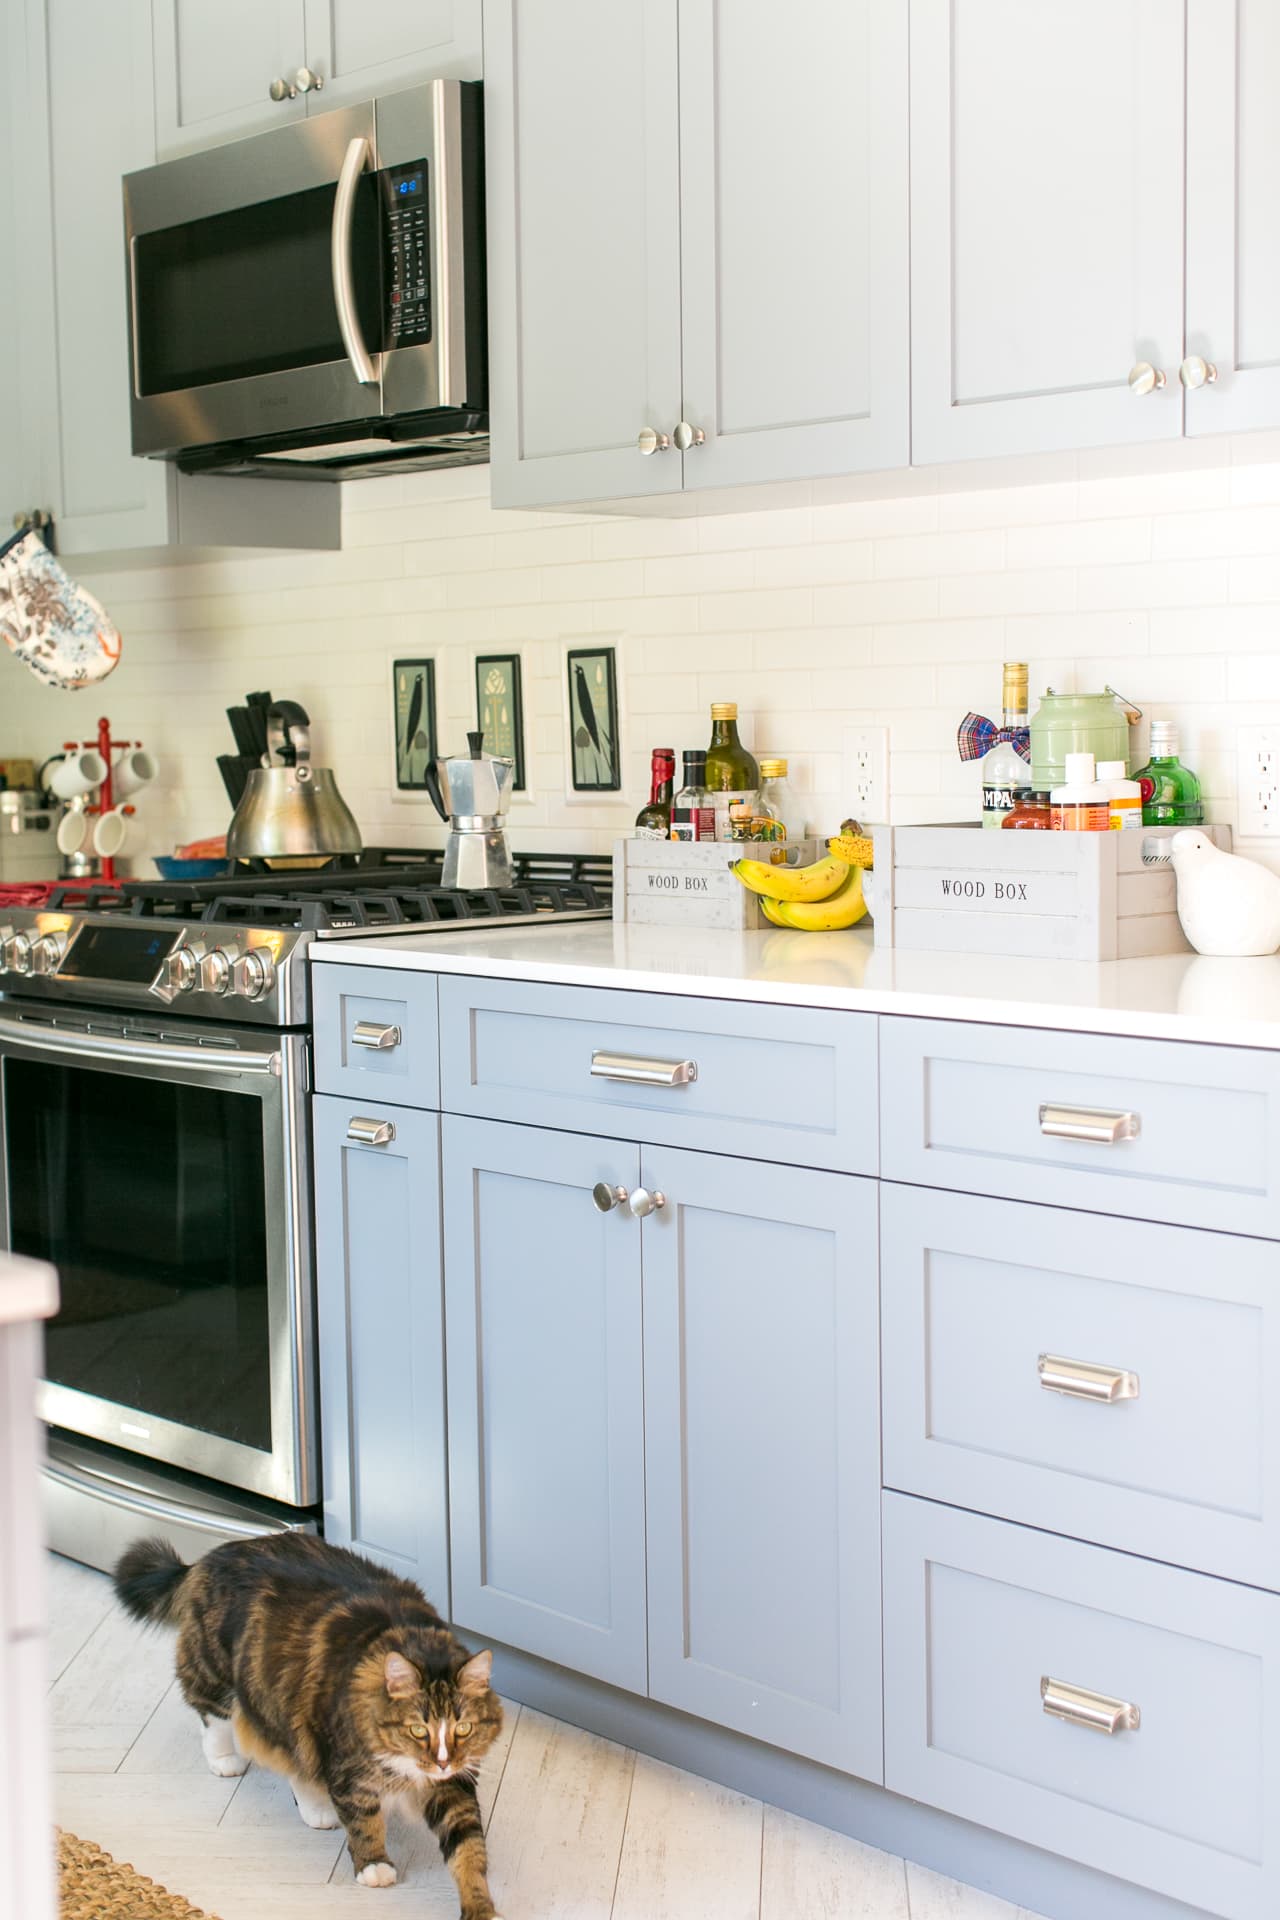 Follow Along in This Step-By-Step Splurge vs Save Kitchen Renovation - Haven